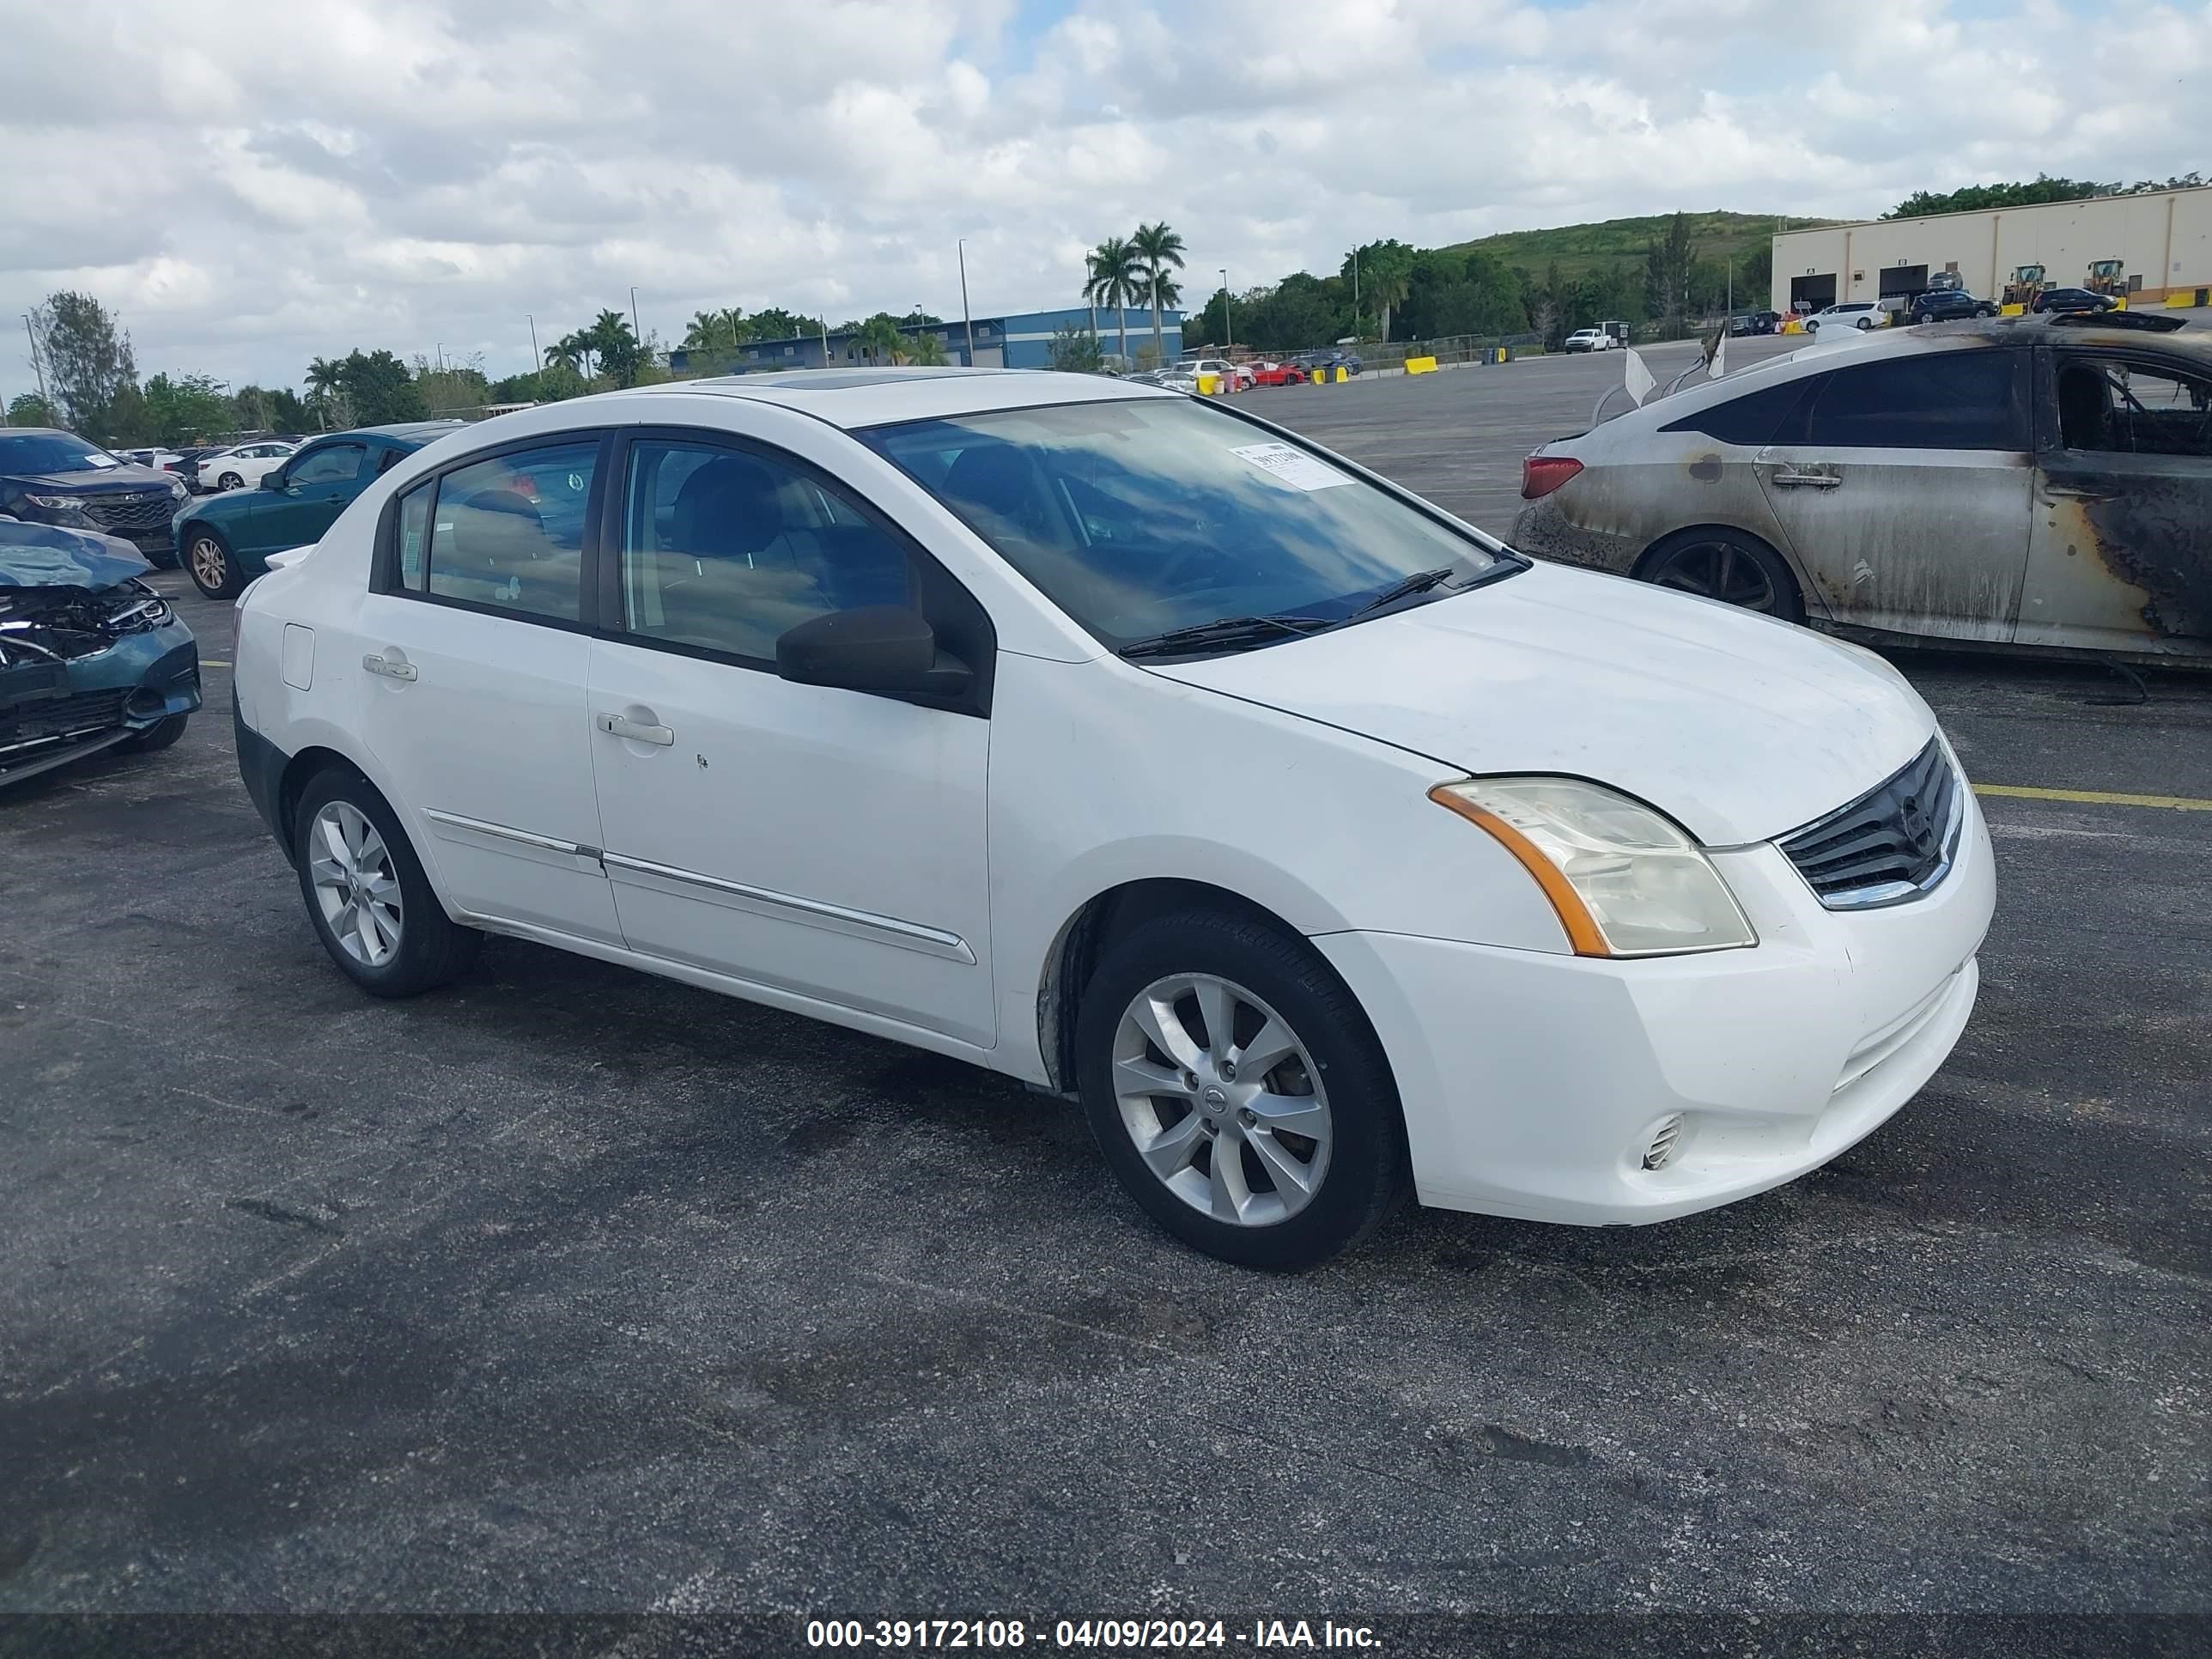 VIN: 3N1AB6APXCL638313 - nissan sentra